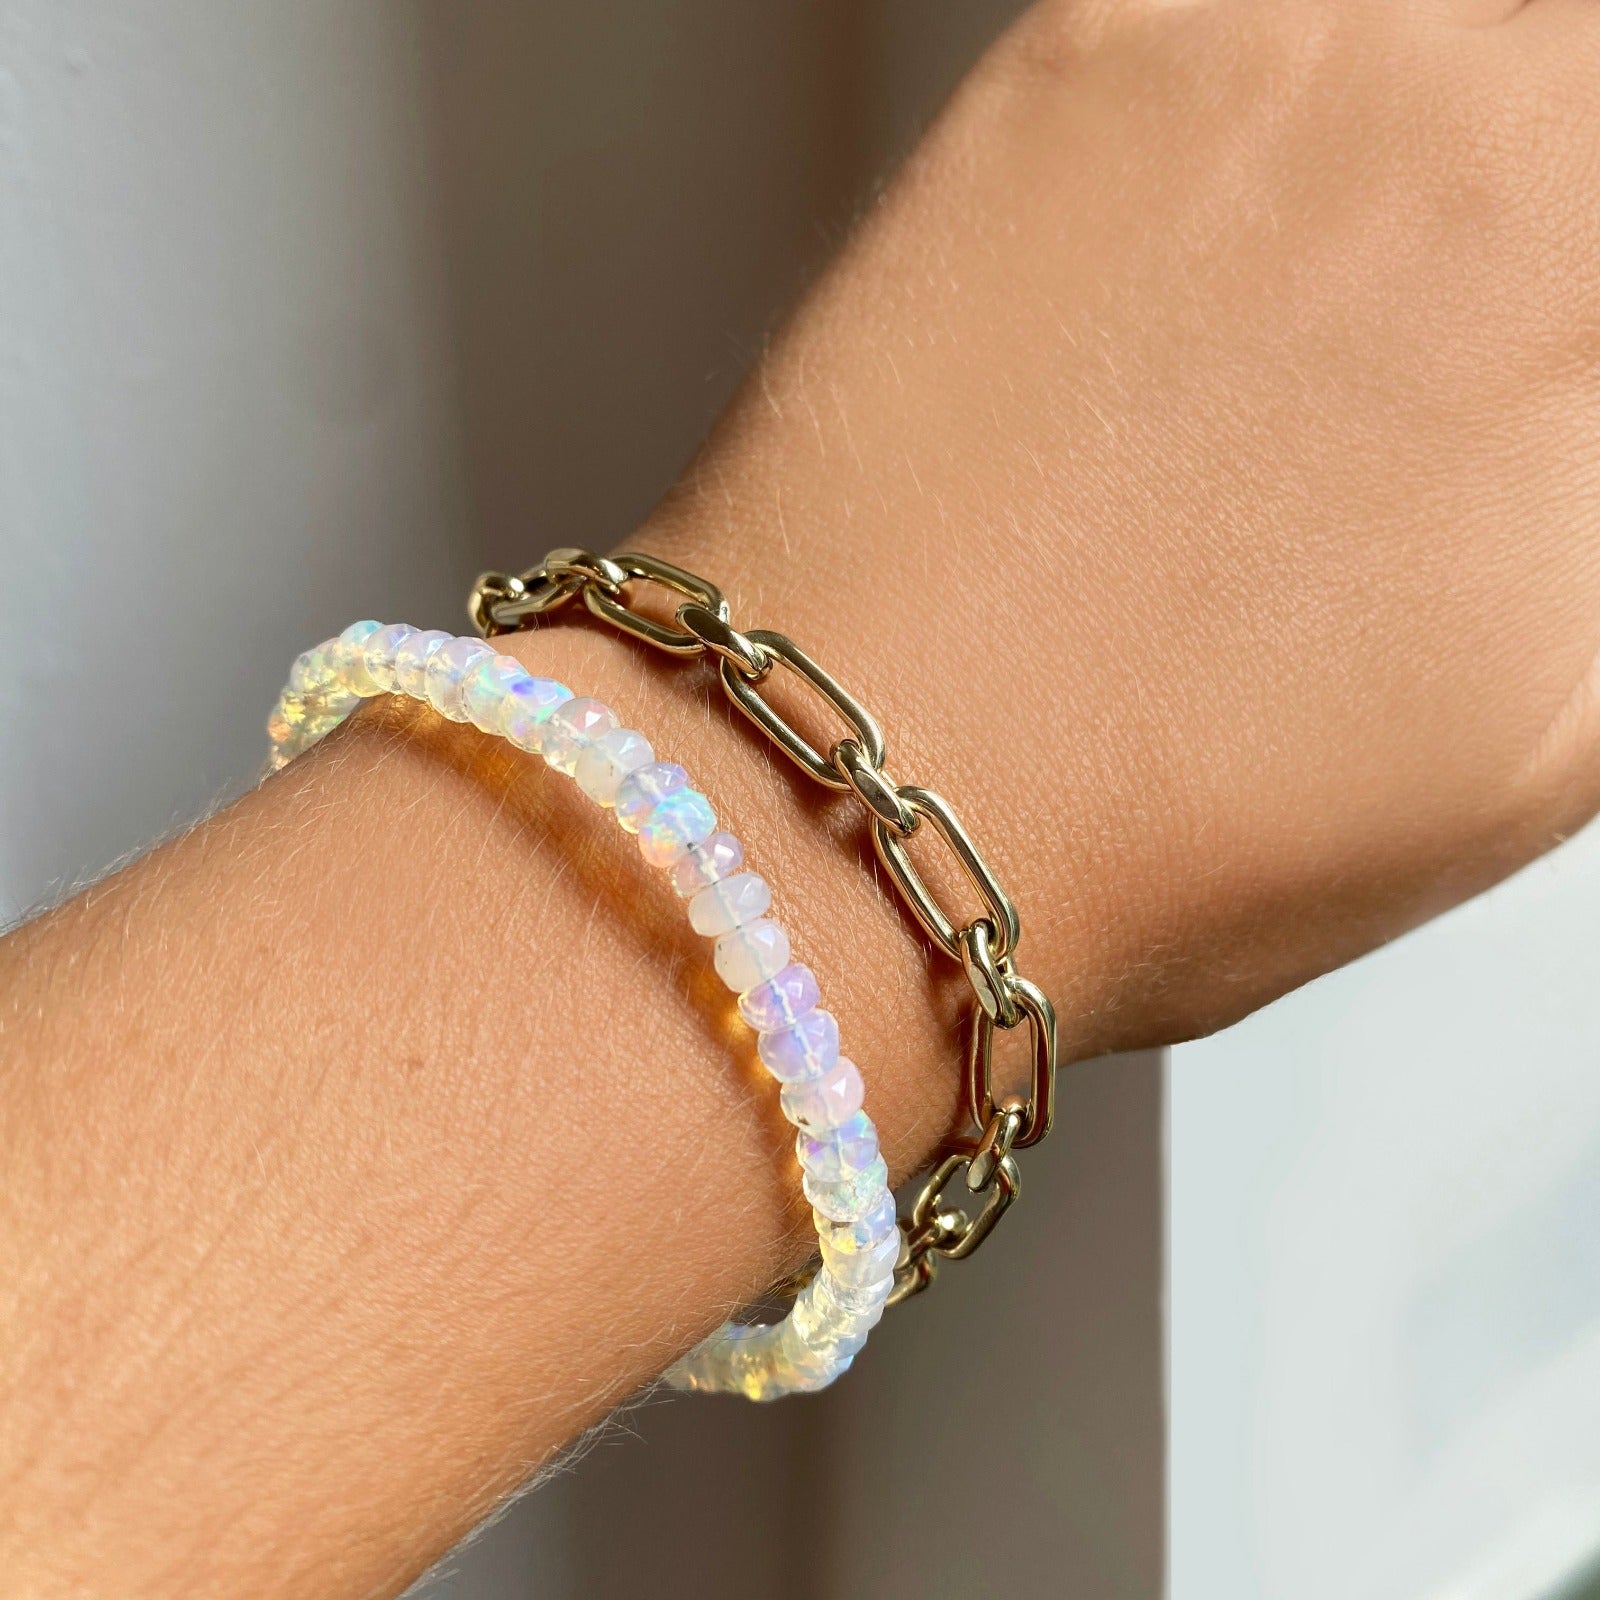 Shimmering beaded bracelet made of faceted opals in shades of milky white and clear on a gold linking lobster clasp. Styled on a wrist layered with diamond cut link bracelet.